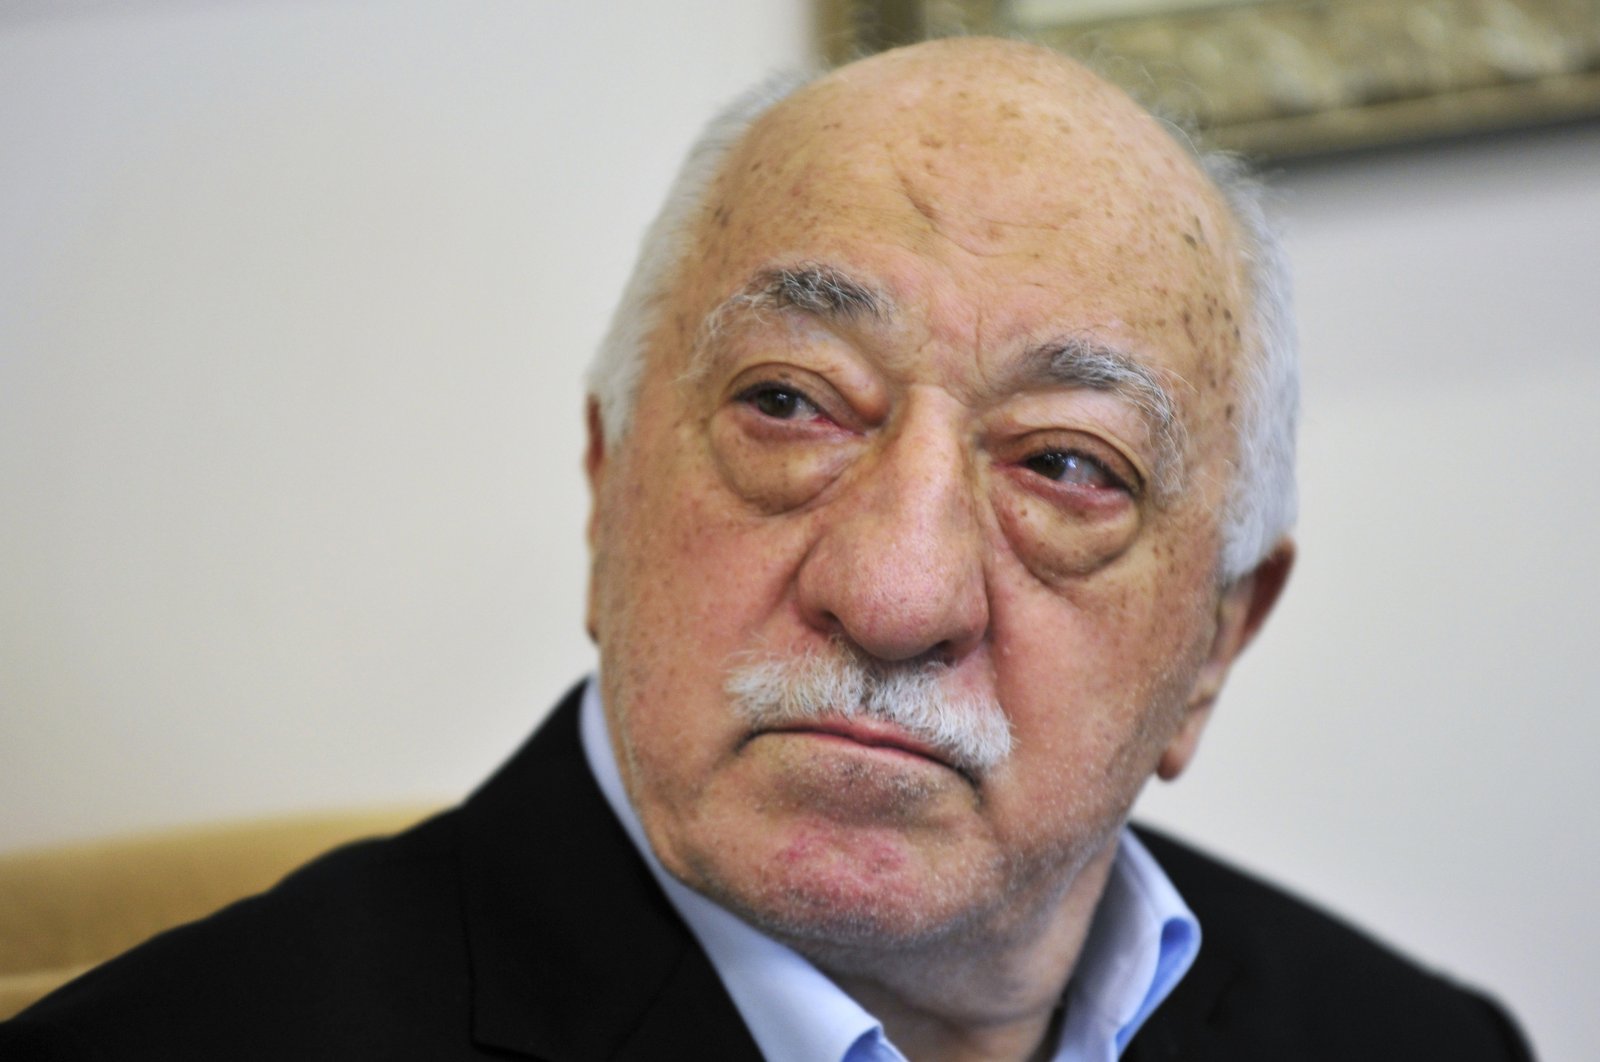 In this file photo, FETÖ leader Fetullah Gülen speaks to members of the media at his compound in Saylorsburg, Pennsylvania, U.S., July 2016. (AP File Photo)